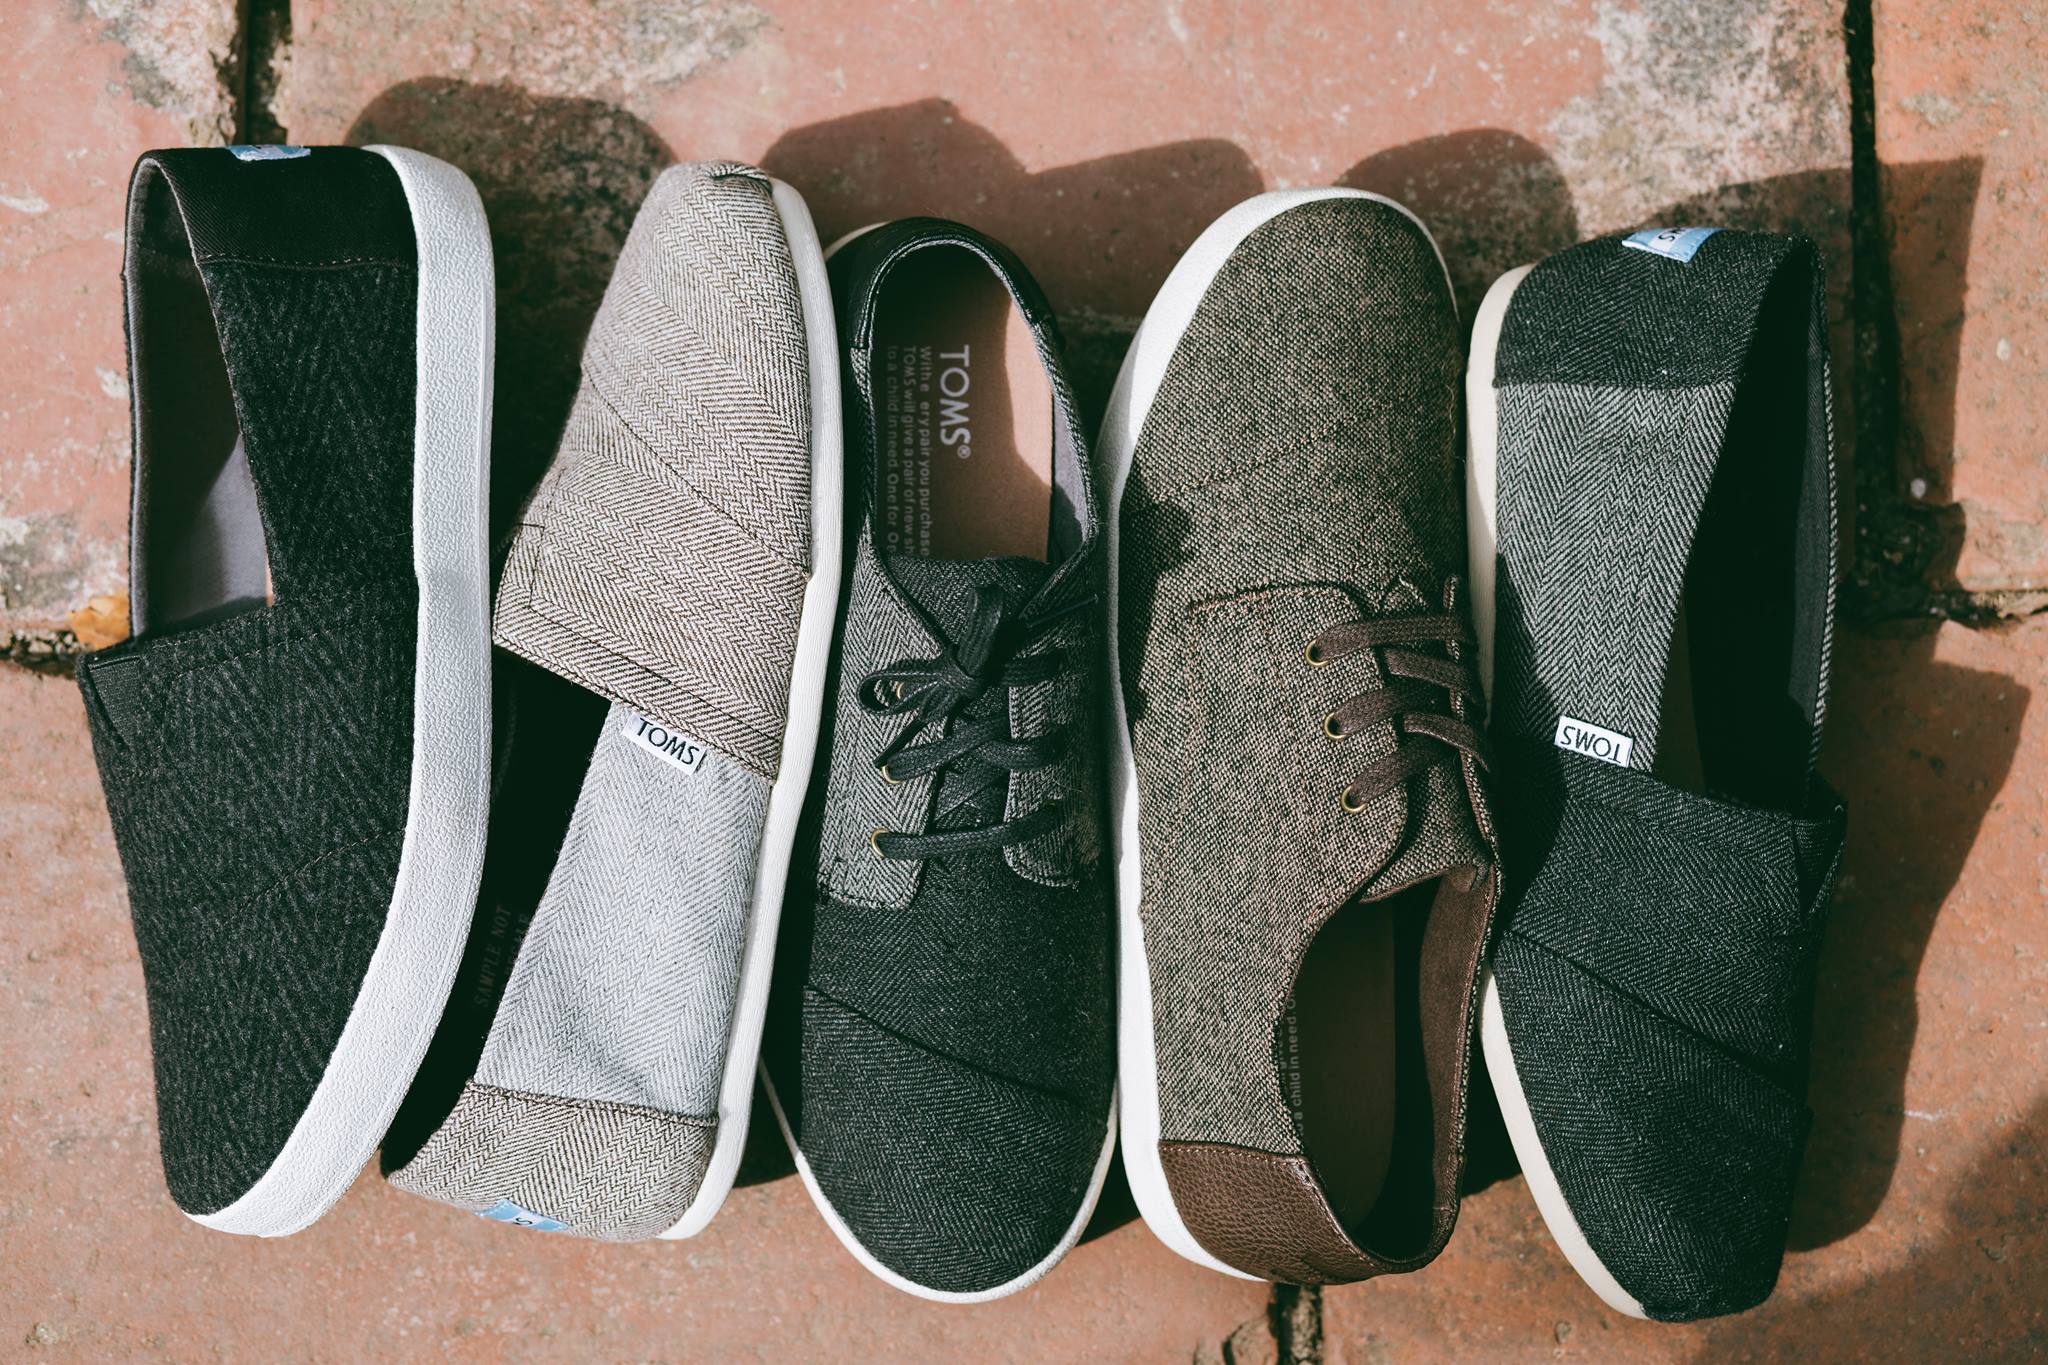 TOMS Shoes Tries Out Brick-And-Mortar 